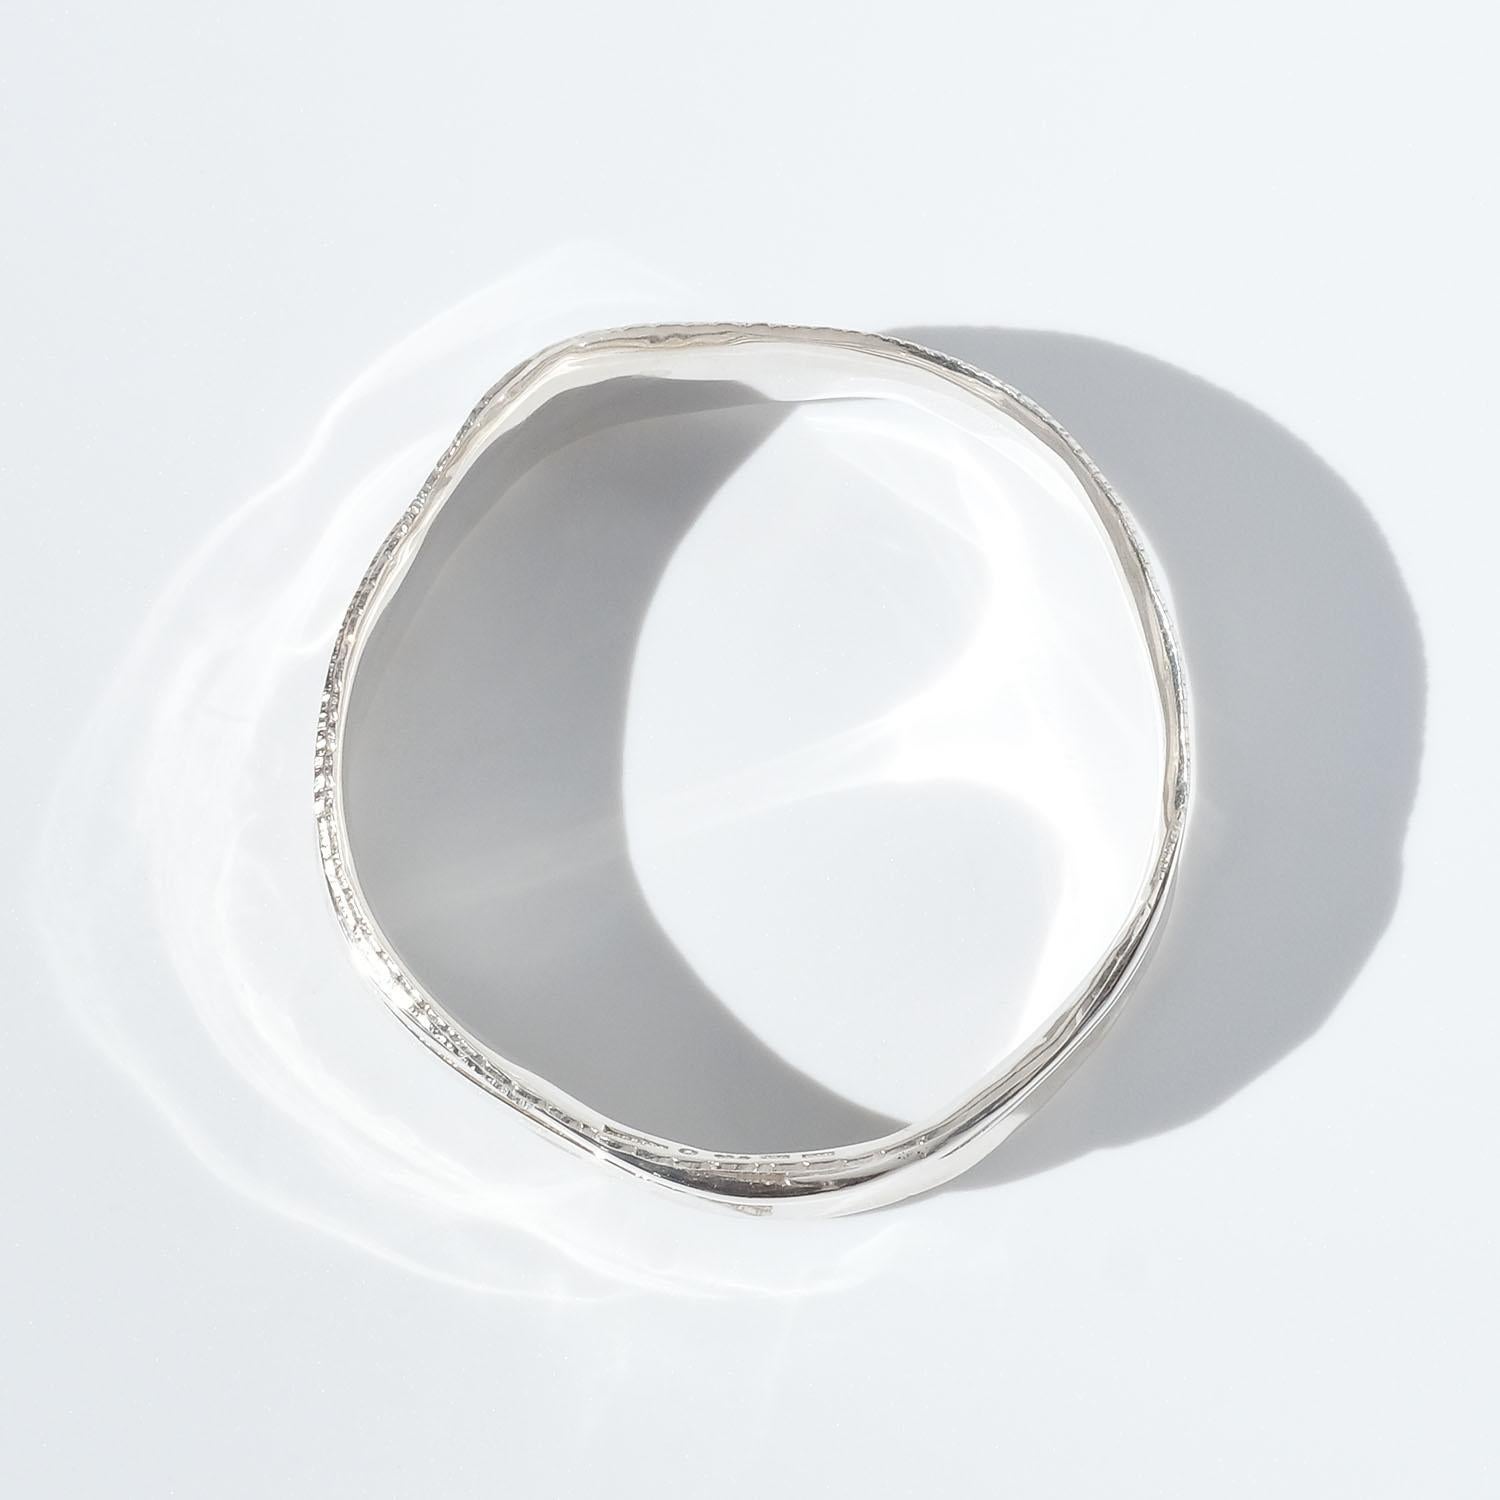 This sterling silver bangle bracelet has a glossy surface and irregular edges. It is decorated with silver flowing stripes.

The bangle will fit well in both an everyday environment as well as in a more festive one. This is what we would call a day